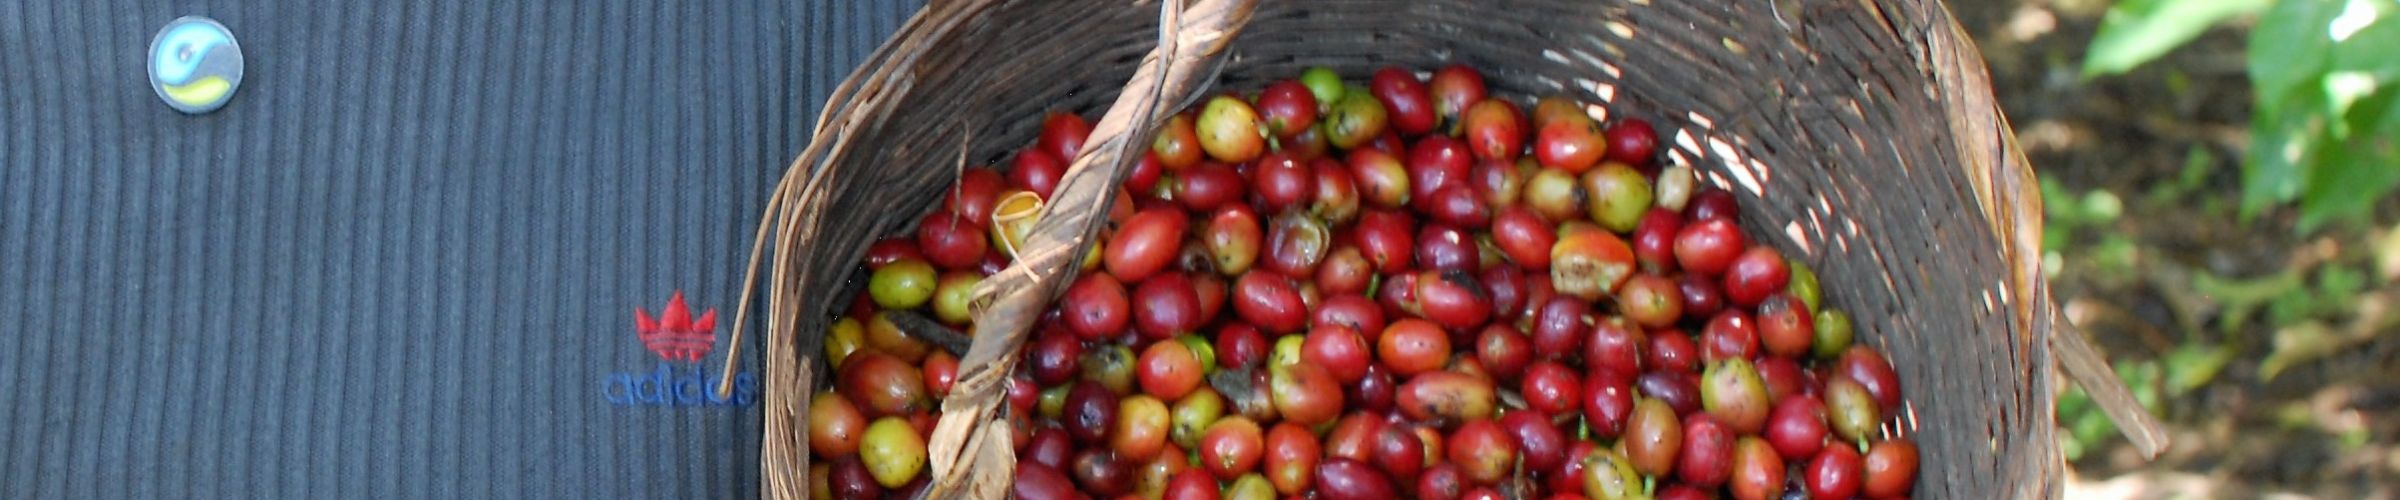 Why is Fairtrade necessary? Farming coffee without Fairtrade